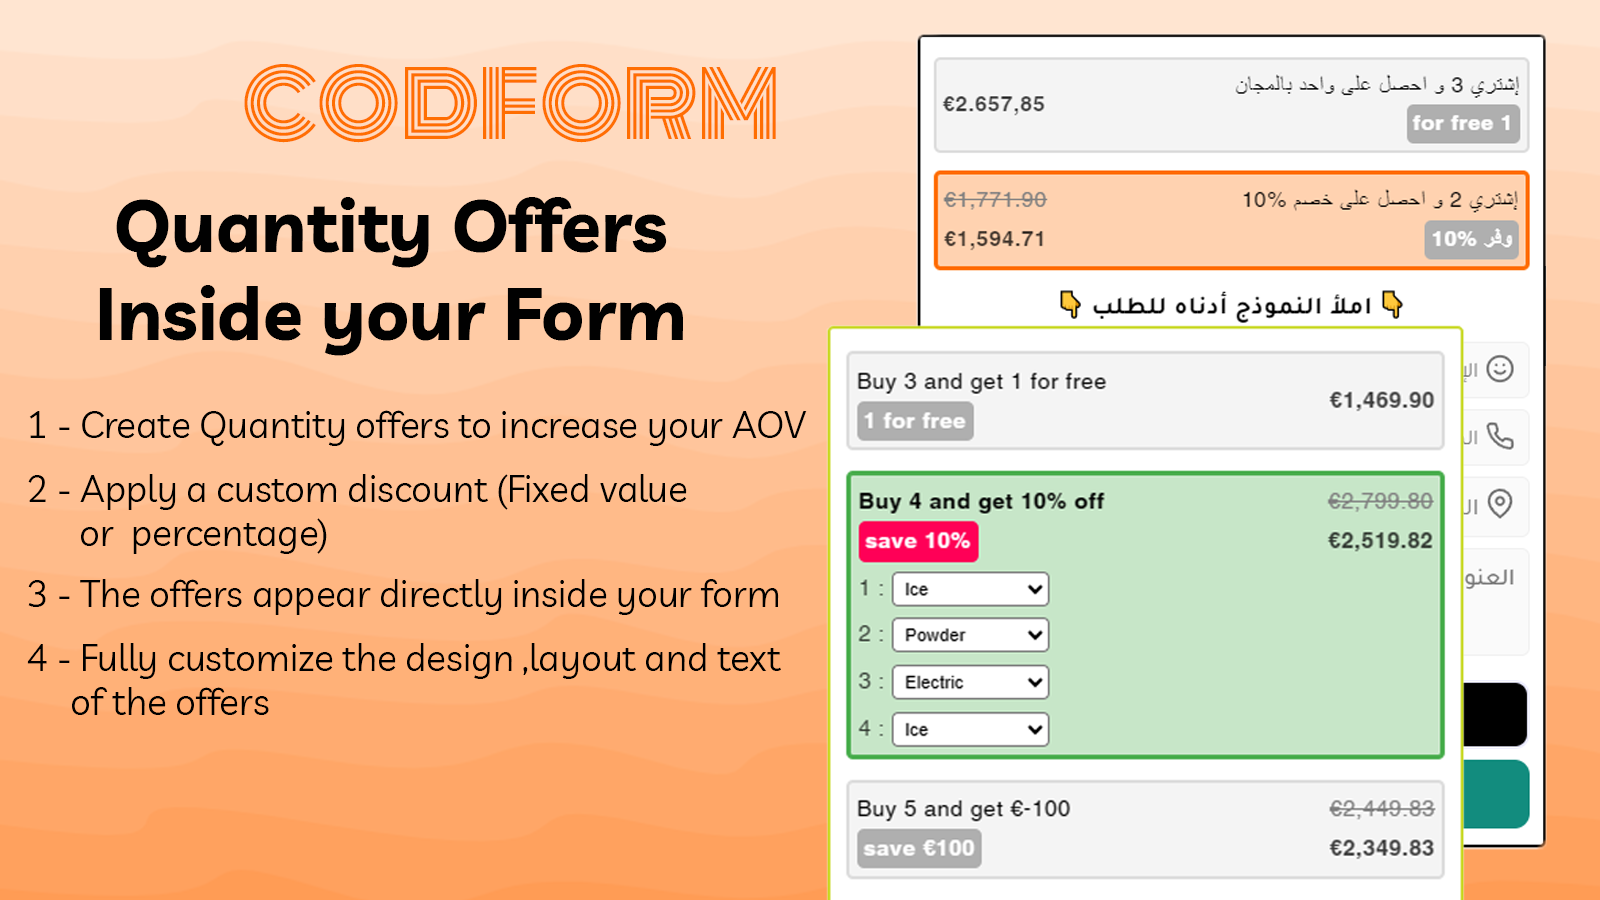 image show the main functions of codform app in shopify 